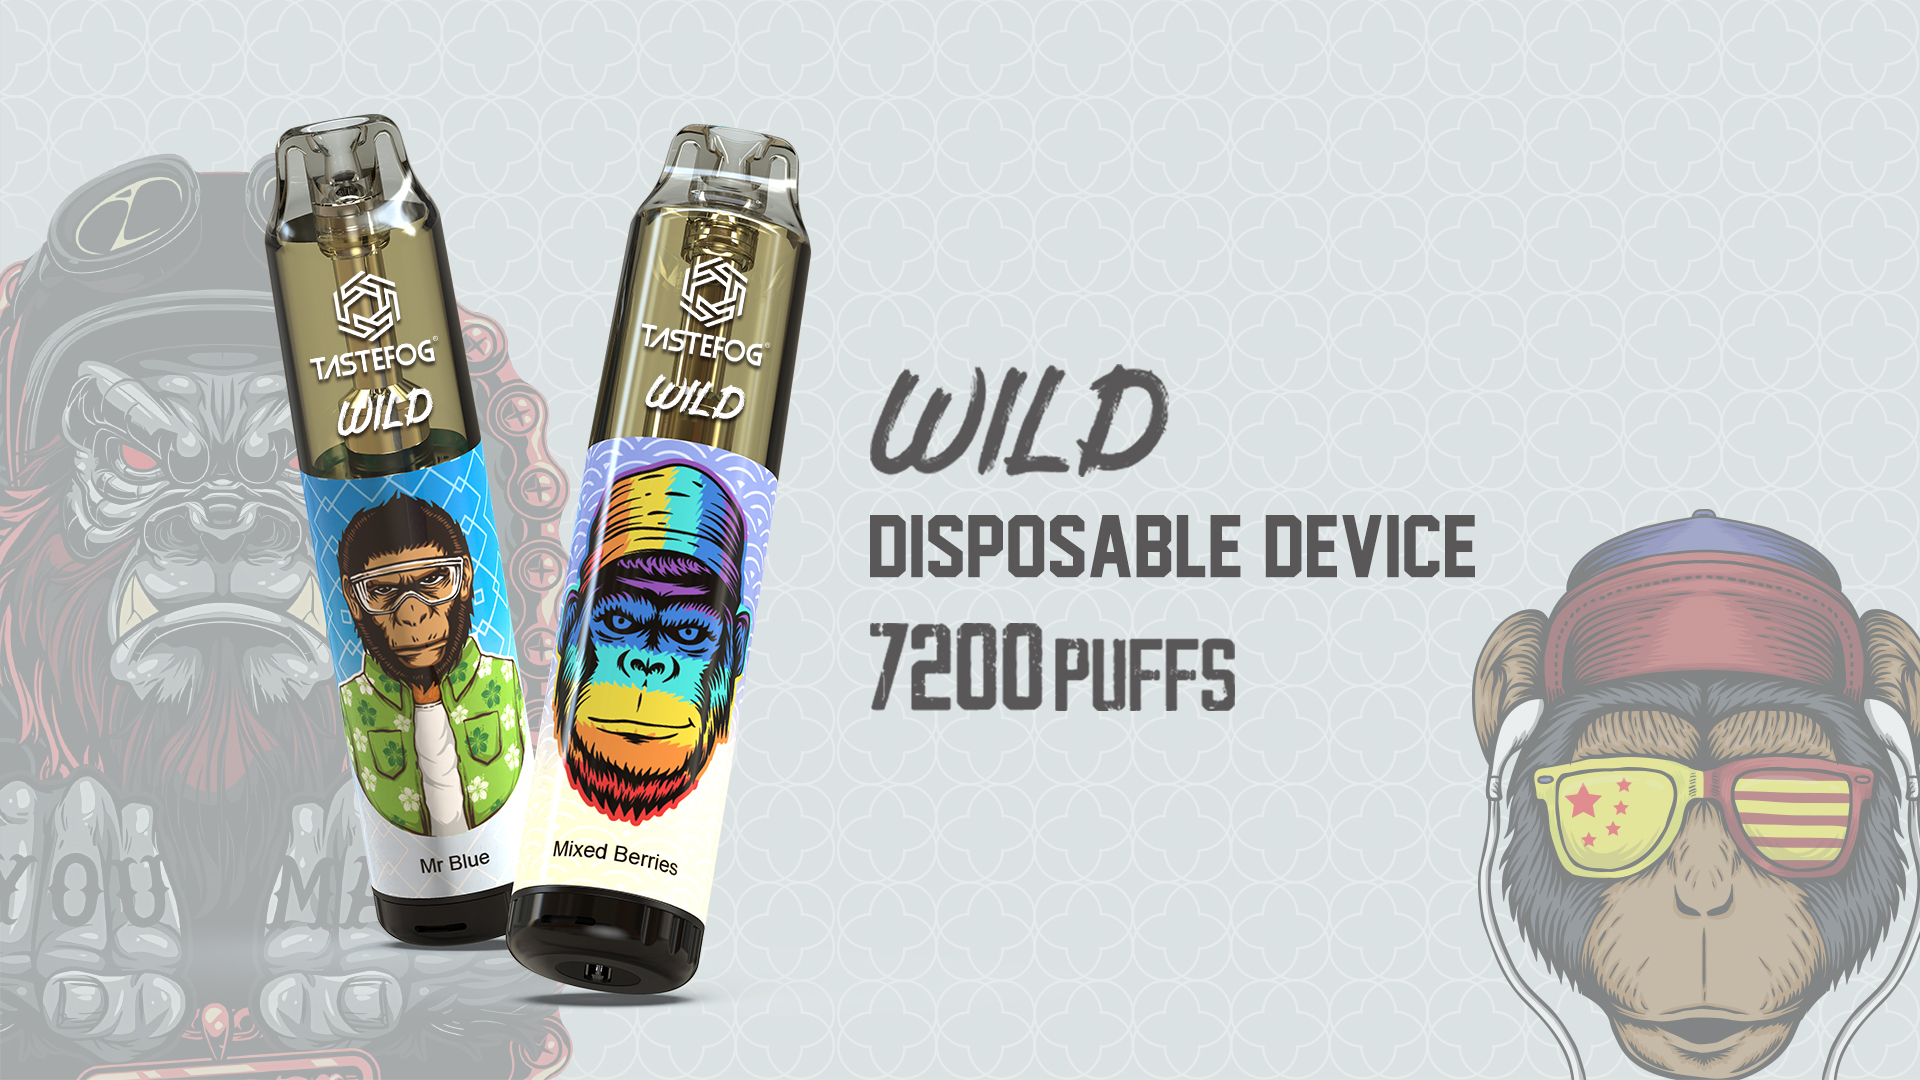 Wild 7200 Puffs: Tastefog’s Unveiling of Excellence in 2023